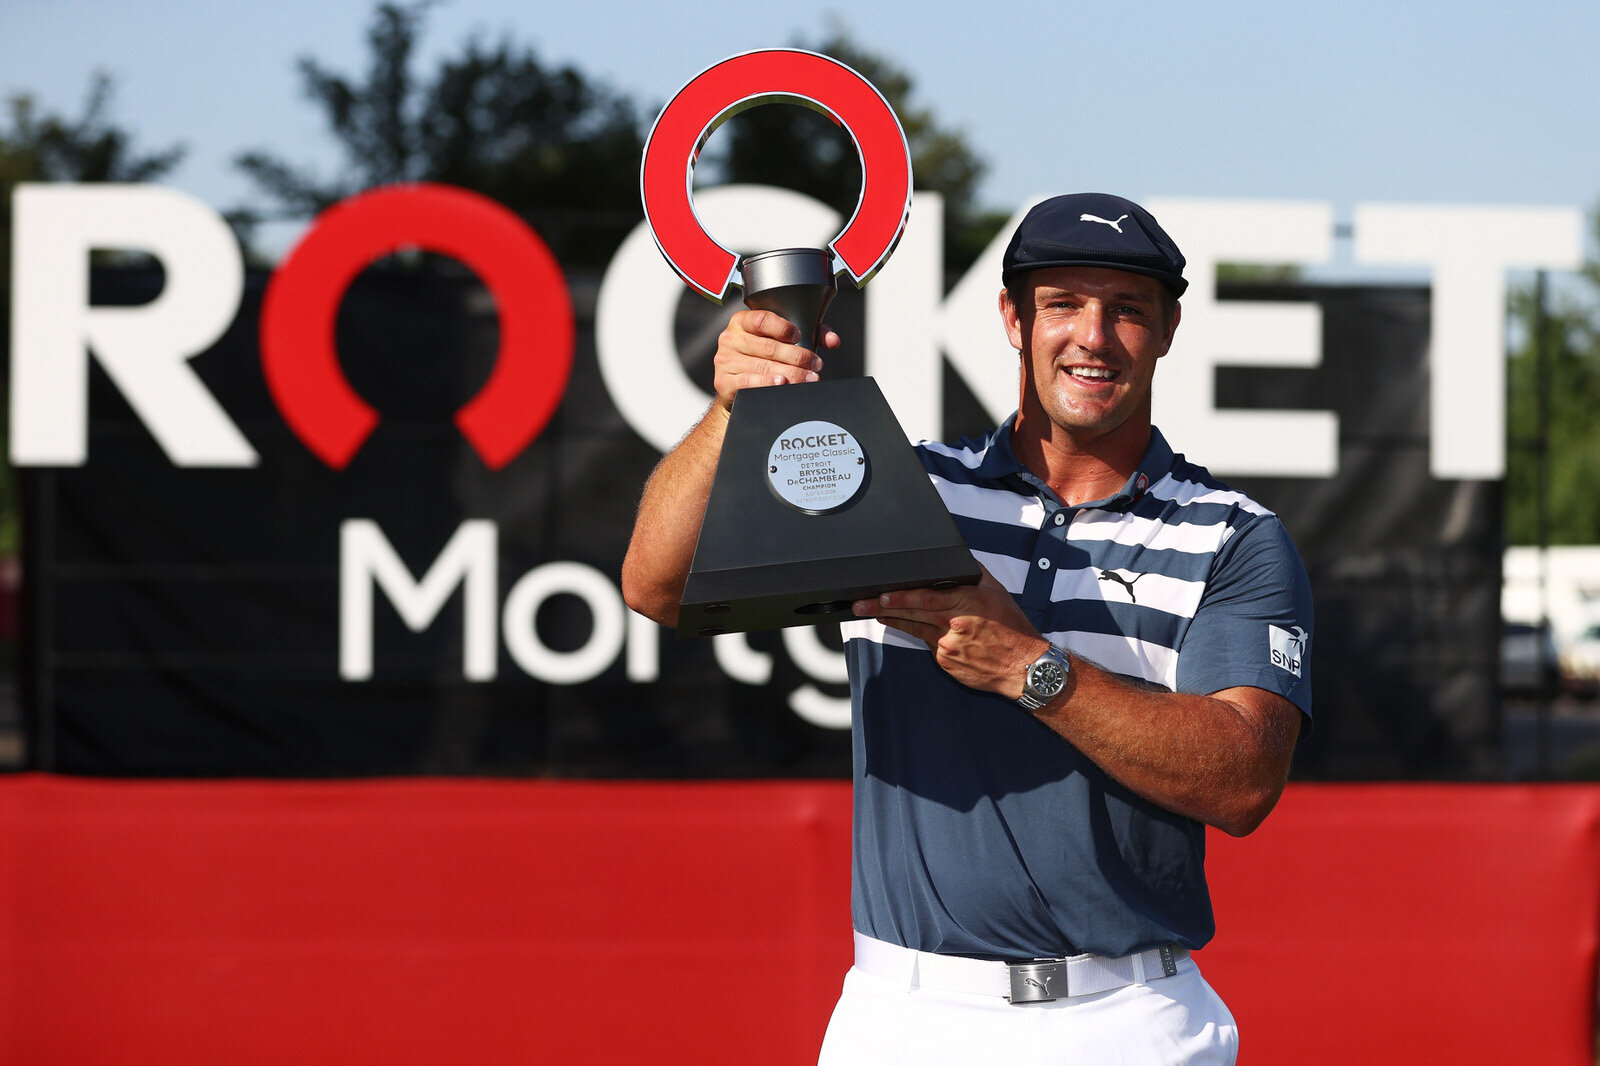  DETROIT, MICHIGAN - JULY 05: Bryson DeChambeau of the United States celebrates with the trophy after winning during the final round of the Rocket Mortgage Classic on July 05, 2020 at the Detroit Golf Club in Detroit, Michigan. (Photo by Gregory Sham